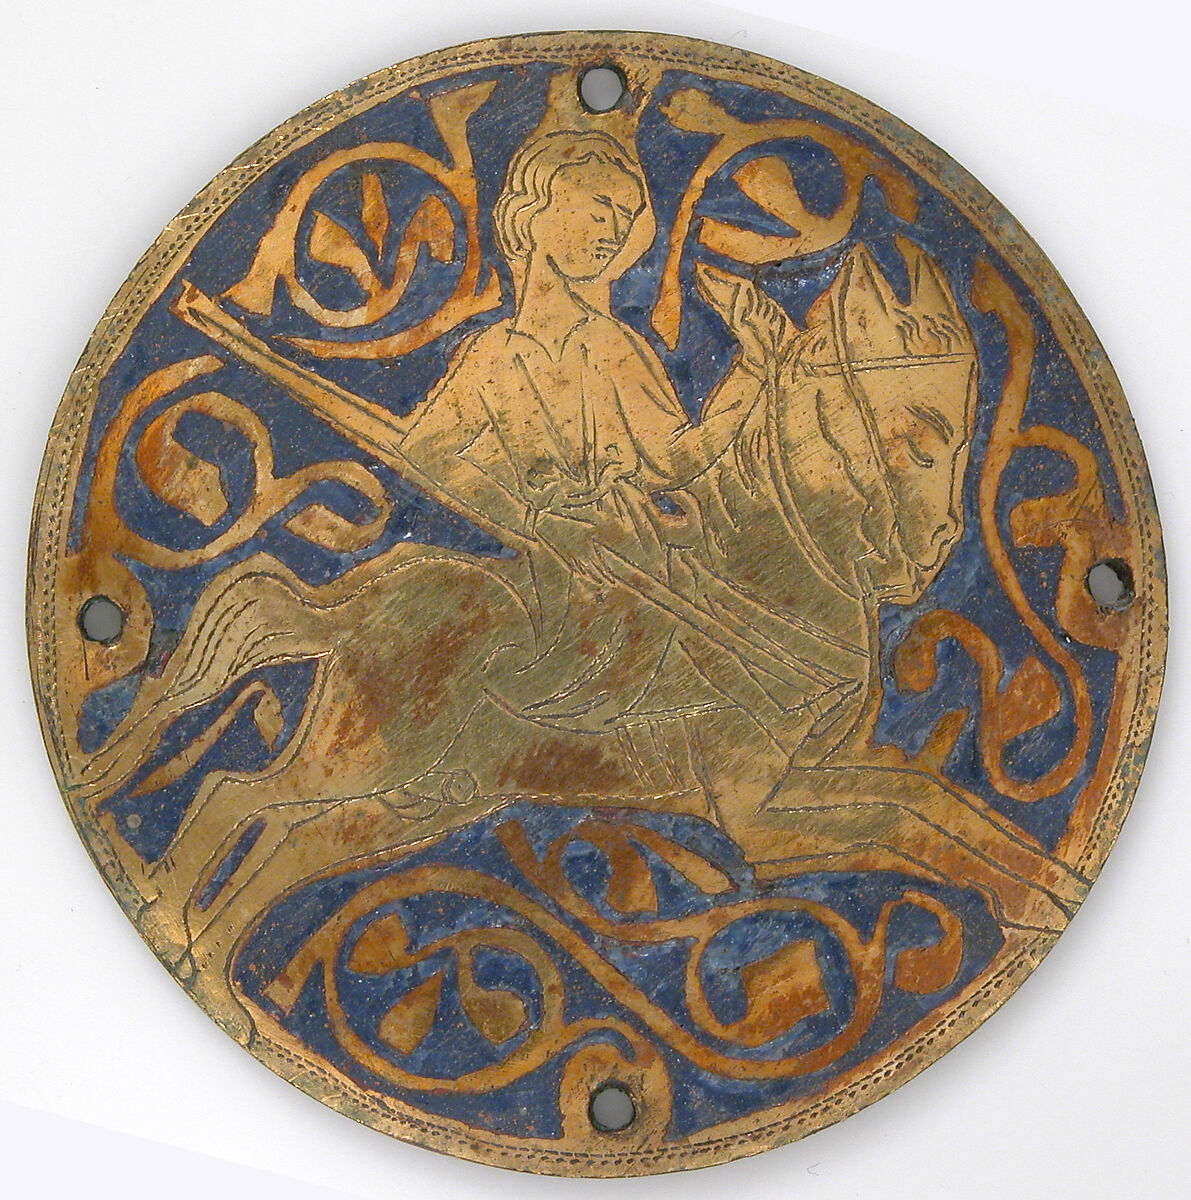 Medallion with Youth on Galloping Horse, Copper: engraved and gilt; champlevé enamel: medium and light blue and white, French 